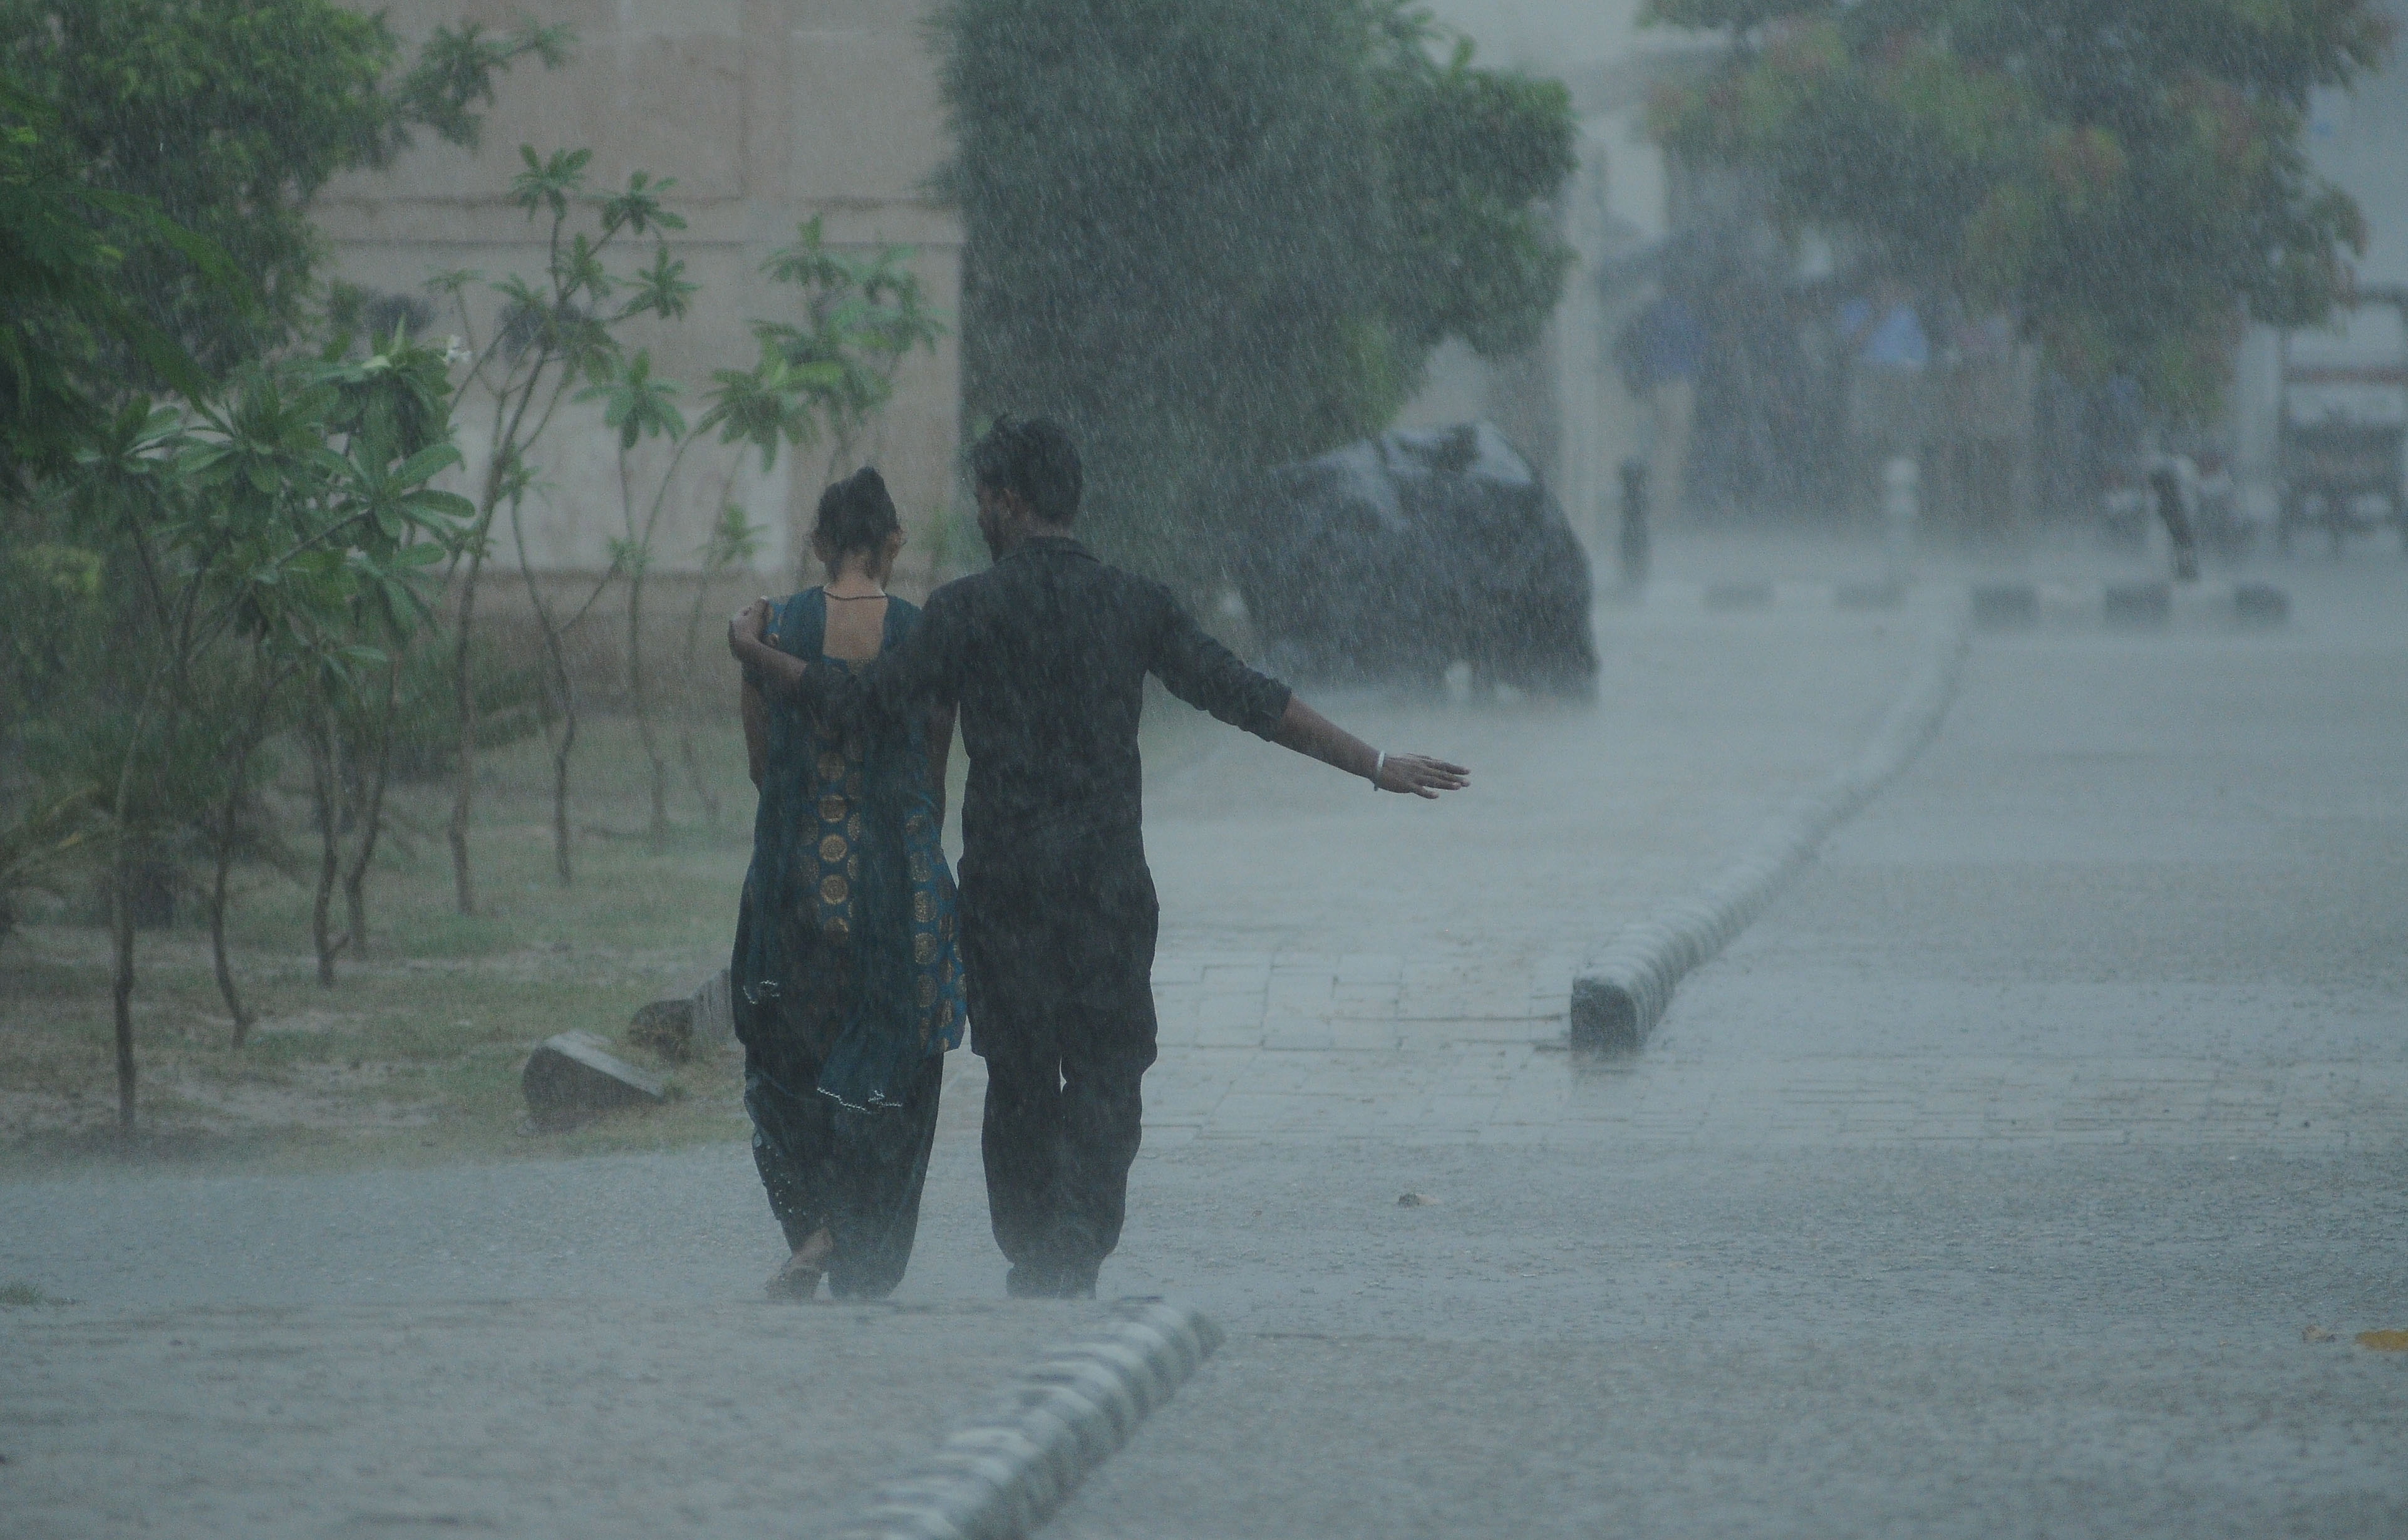 epa07719058 A couple walks amid monsoon rain, in New Delhi, India, 15 July 2019. According to media reports, More than three million people have been affected by floods and displaced across eastern India amid heavy rains, triggered landslides and flooding that has cost lives and destroyed homes  EPA/STR